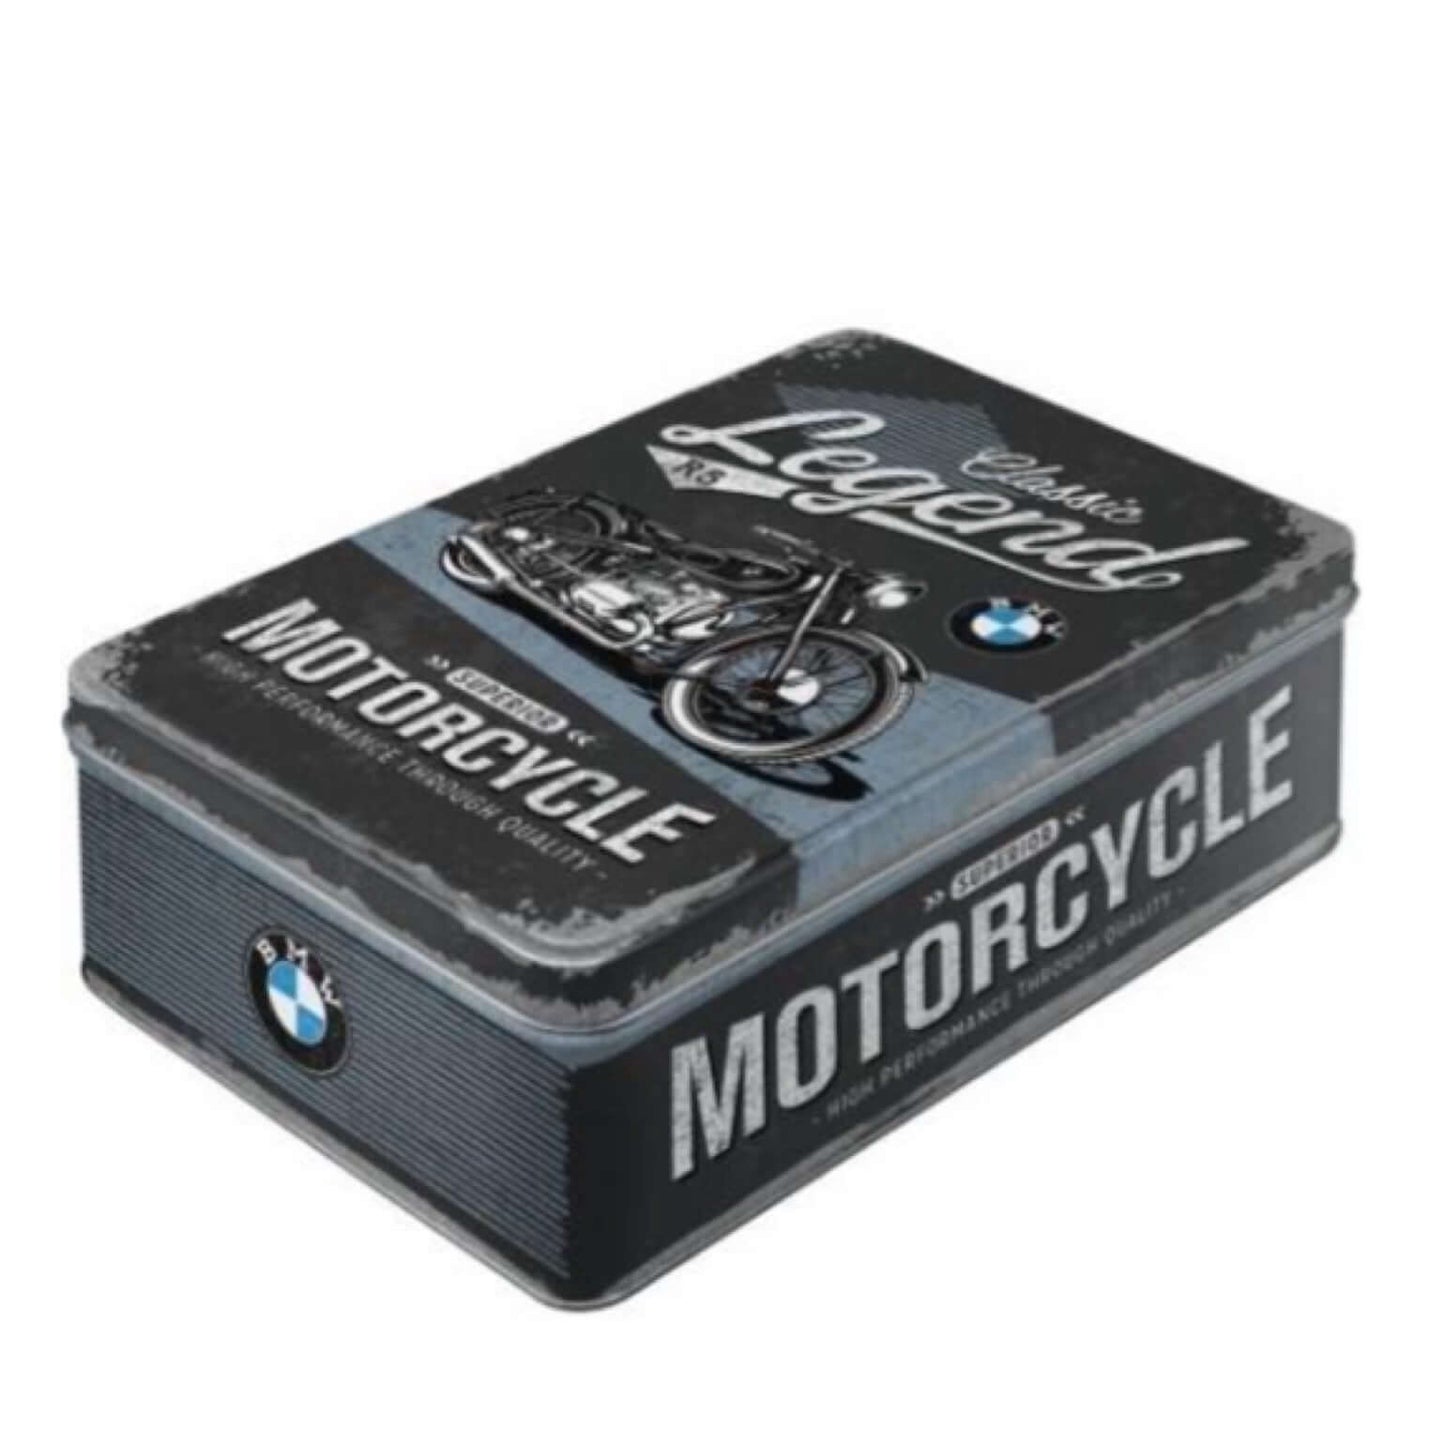 Box Tin Container Service BMW Classic Motorbike Vintage Retro - The Renmy Store Homewares & Gifts 